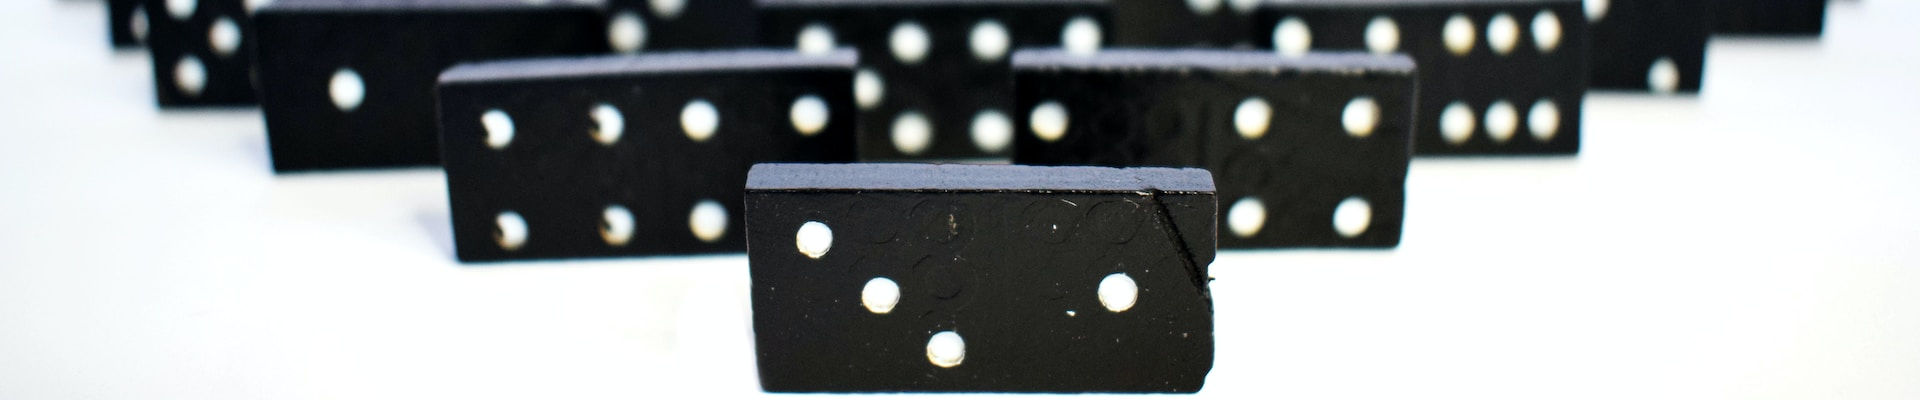 An image of some Dominos